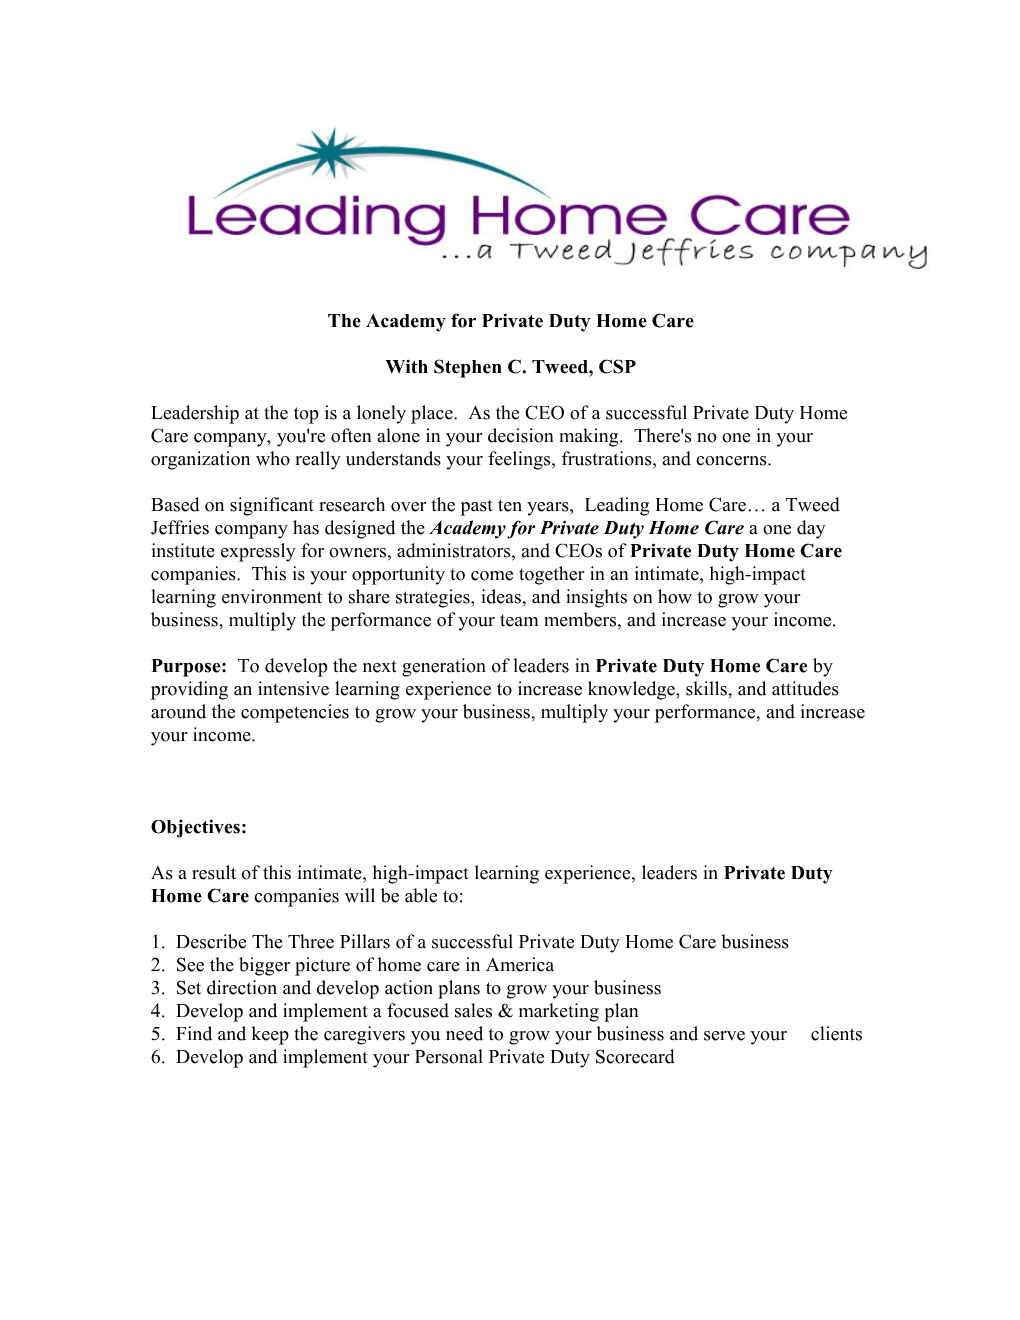 The Academy for Private Duty Home Care